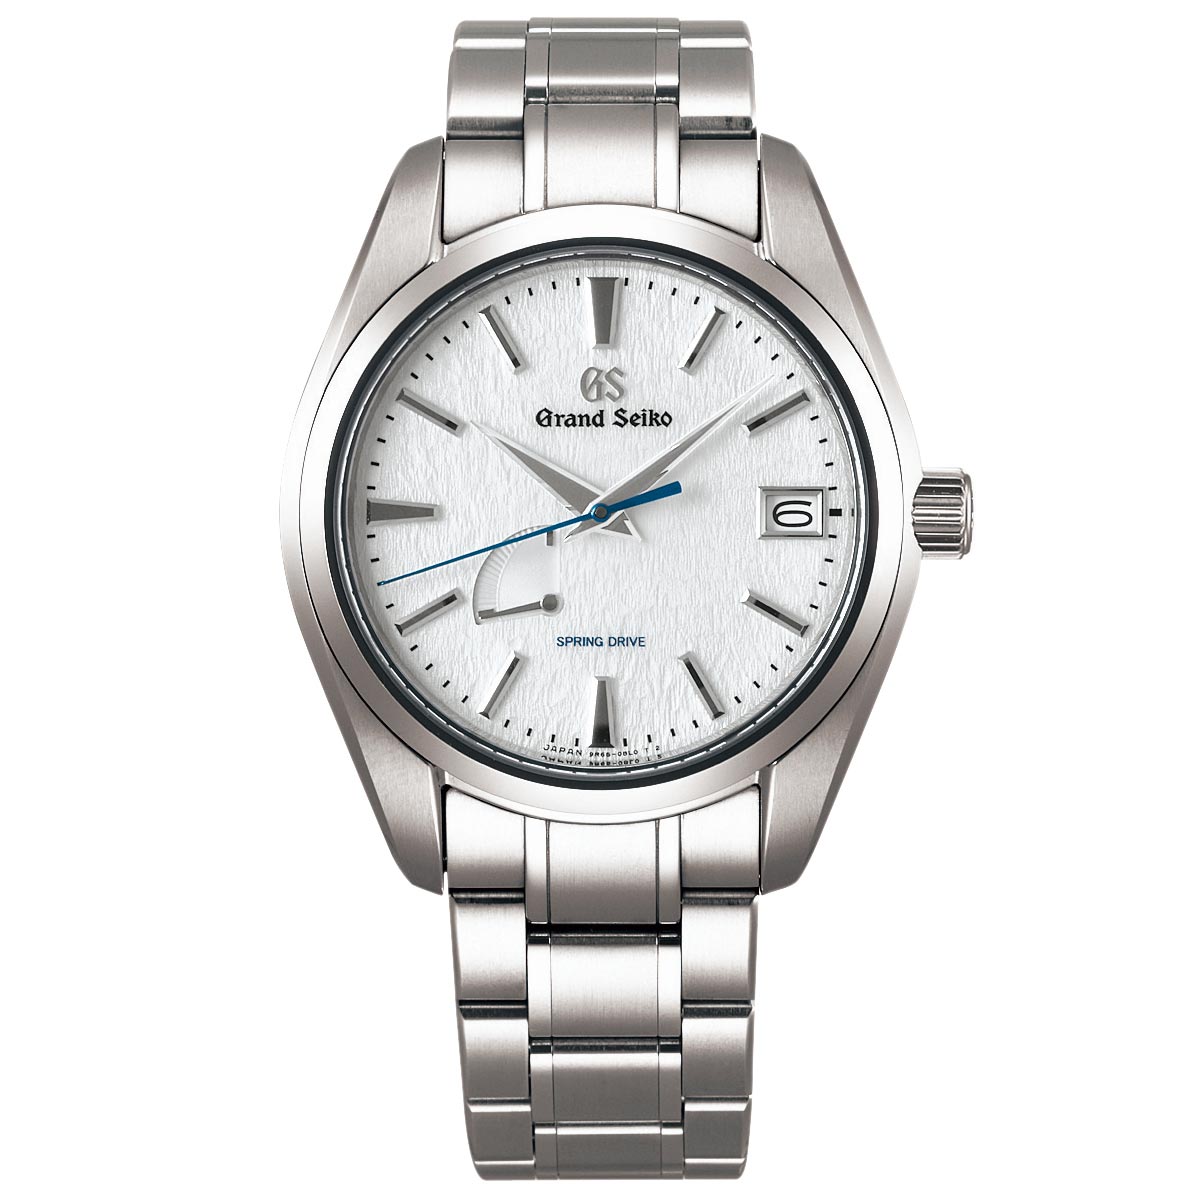 Grand Seiko Heritage Collection Spring Drive 41mm Watch